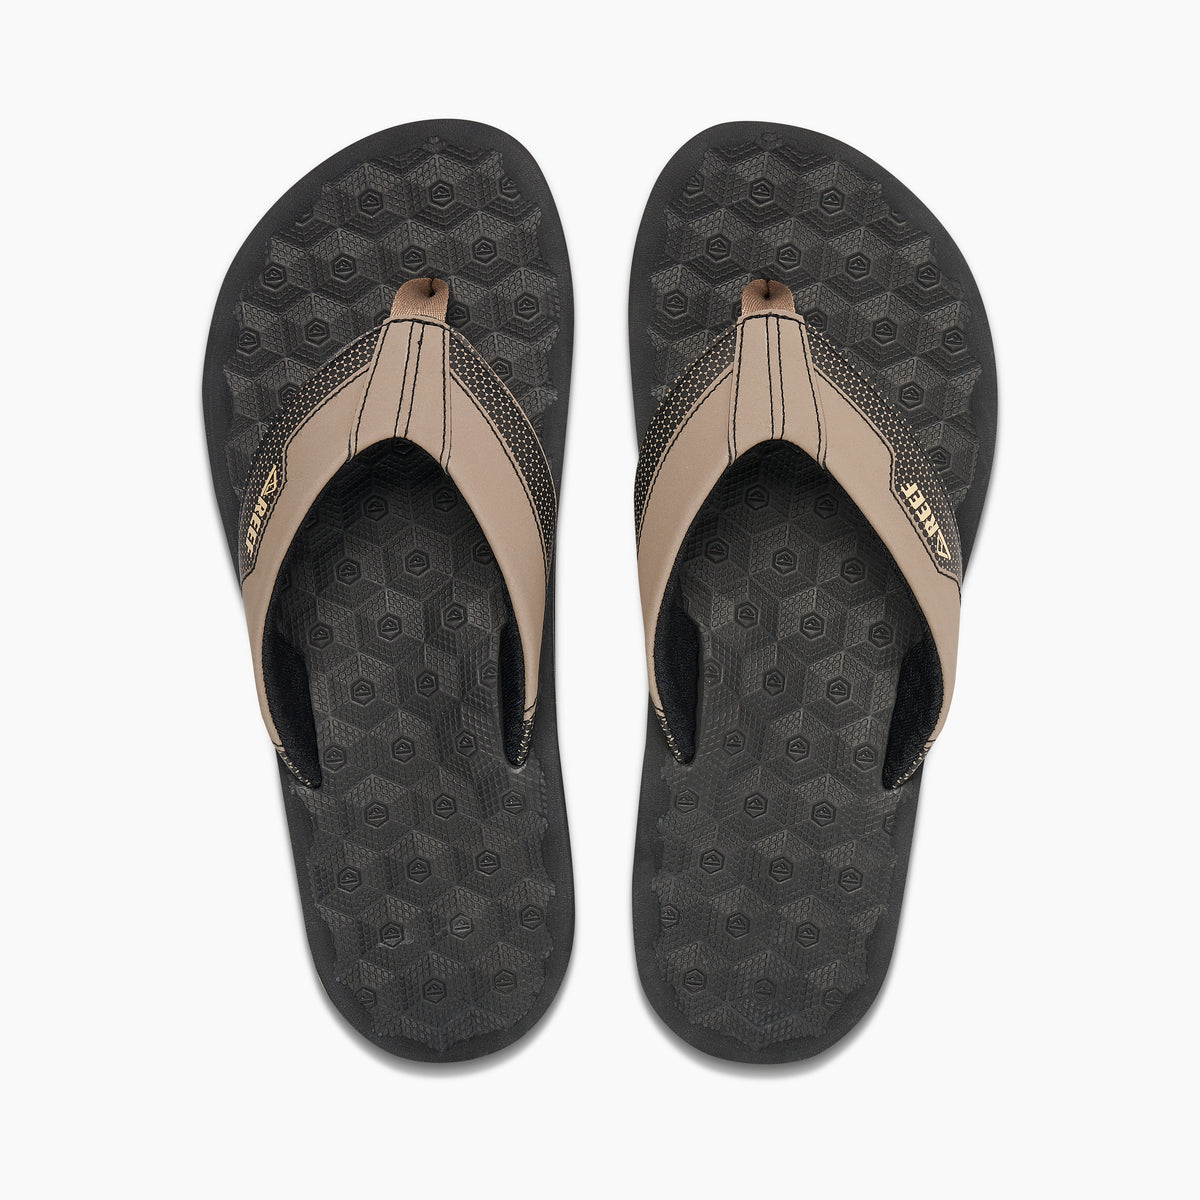 Reef Mens Sandals | The Ripper